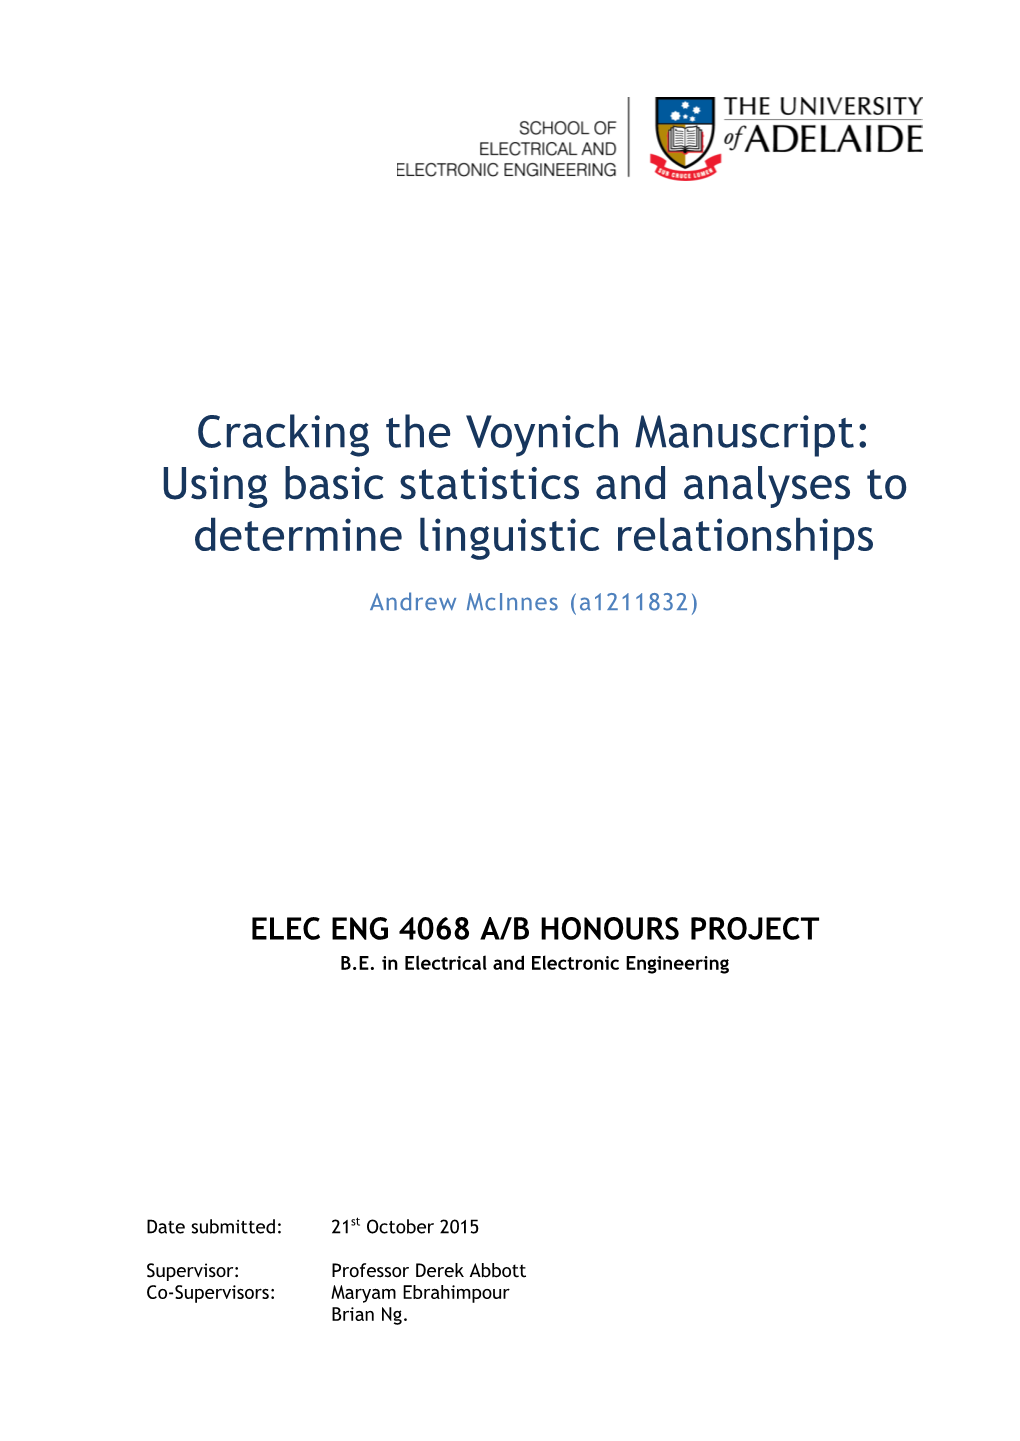 Cracking the Voynich Manuscript: Using Basic Statistics and Analyses to Determine Linguistic Relationships